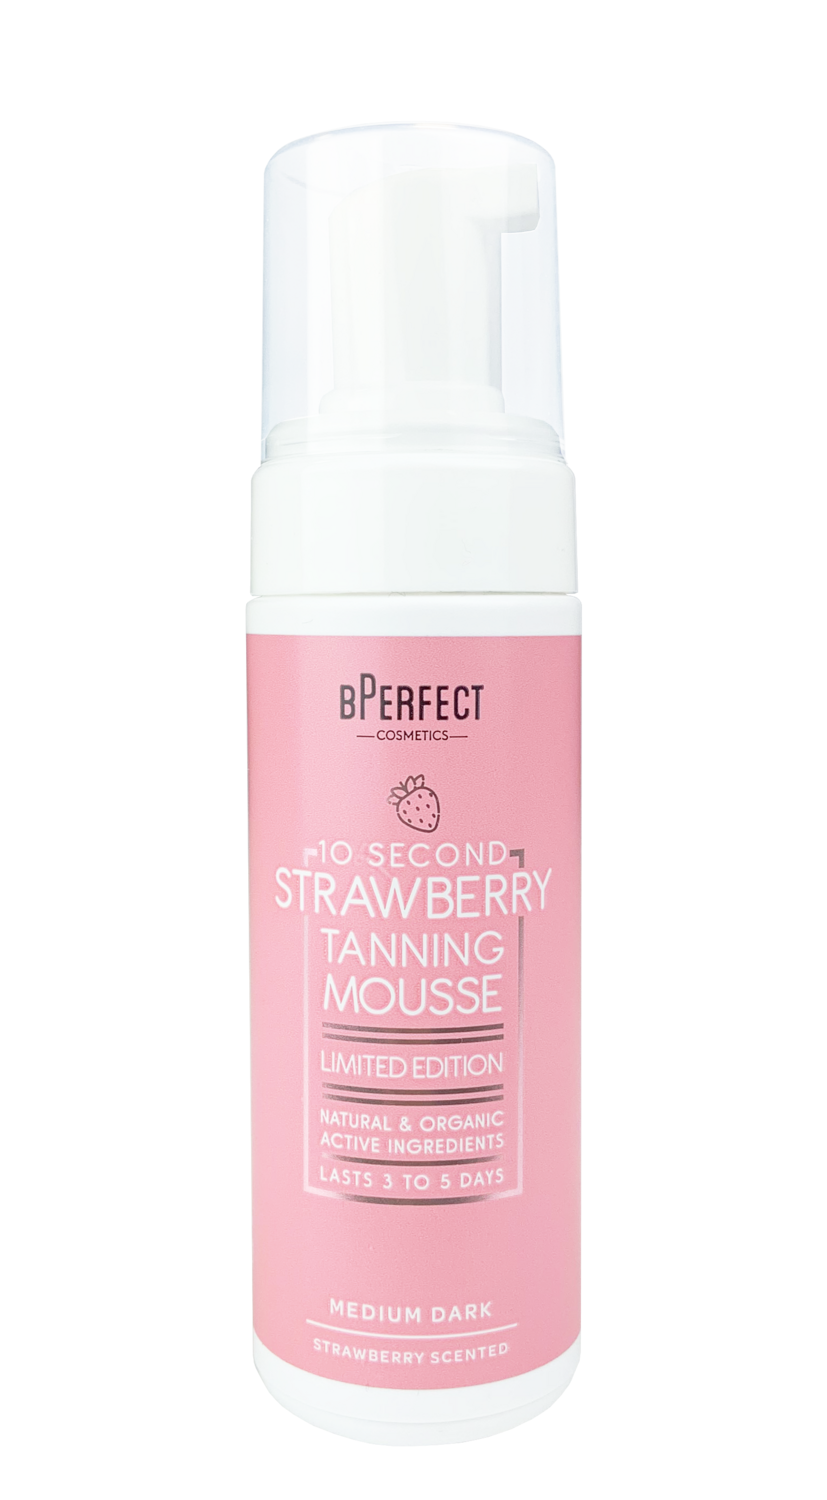 10 Second Strawberry Tanning Mousse